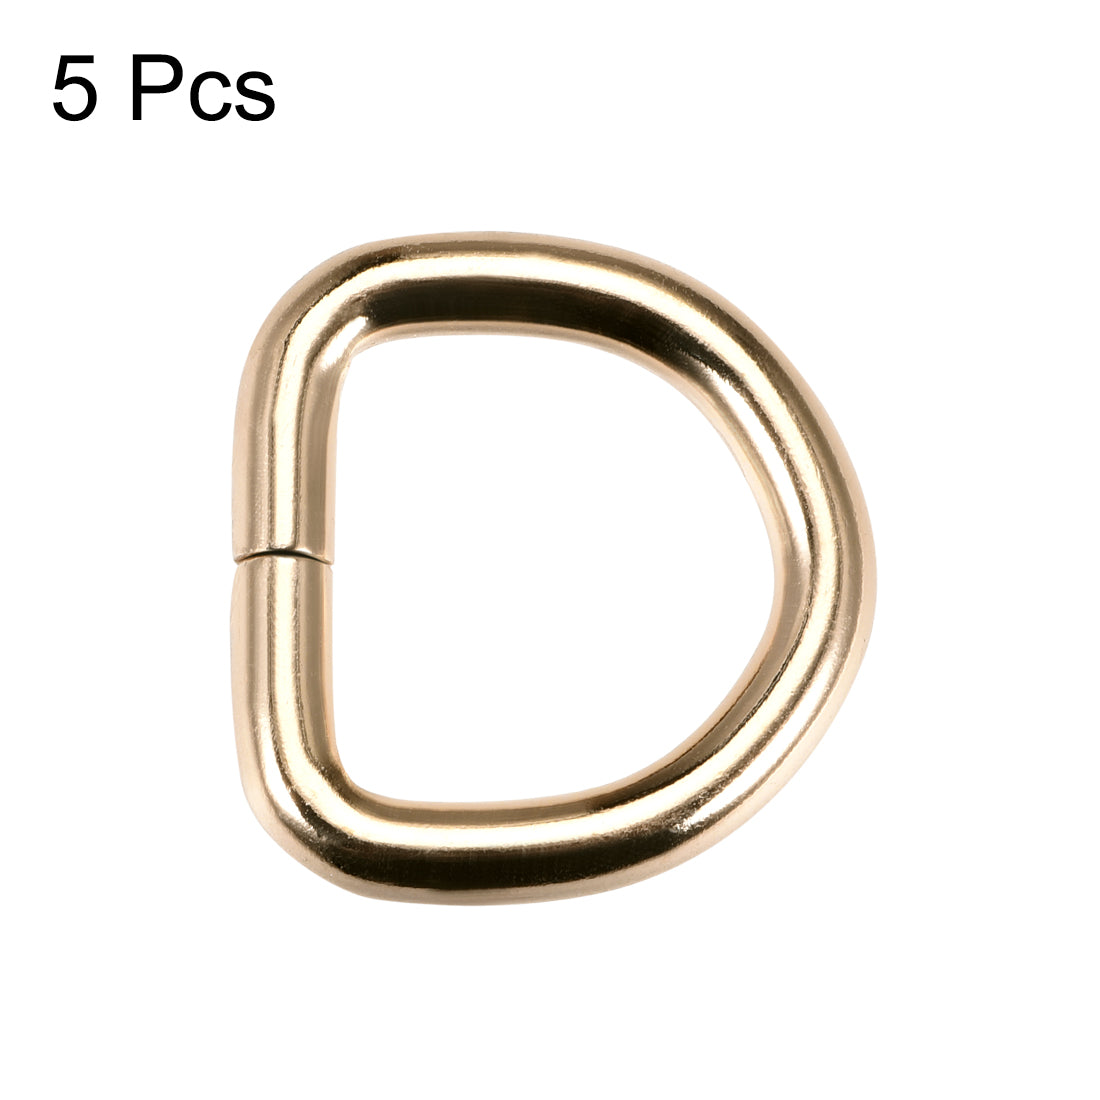 uxcell Uxcell 5 Pcs D Ring Buckle 0.8 Inch Metal Semi-Circular D-Rings Gold Tone for Hardware Bags Belts Craft DIY Accessories